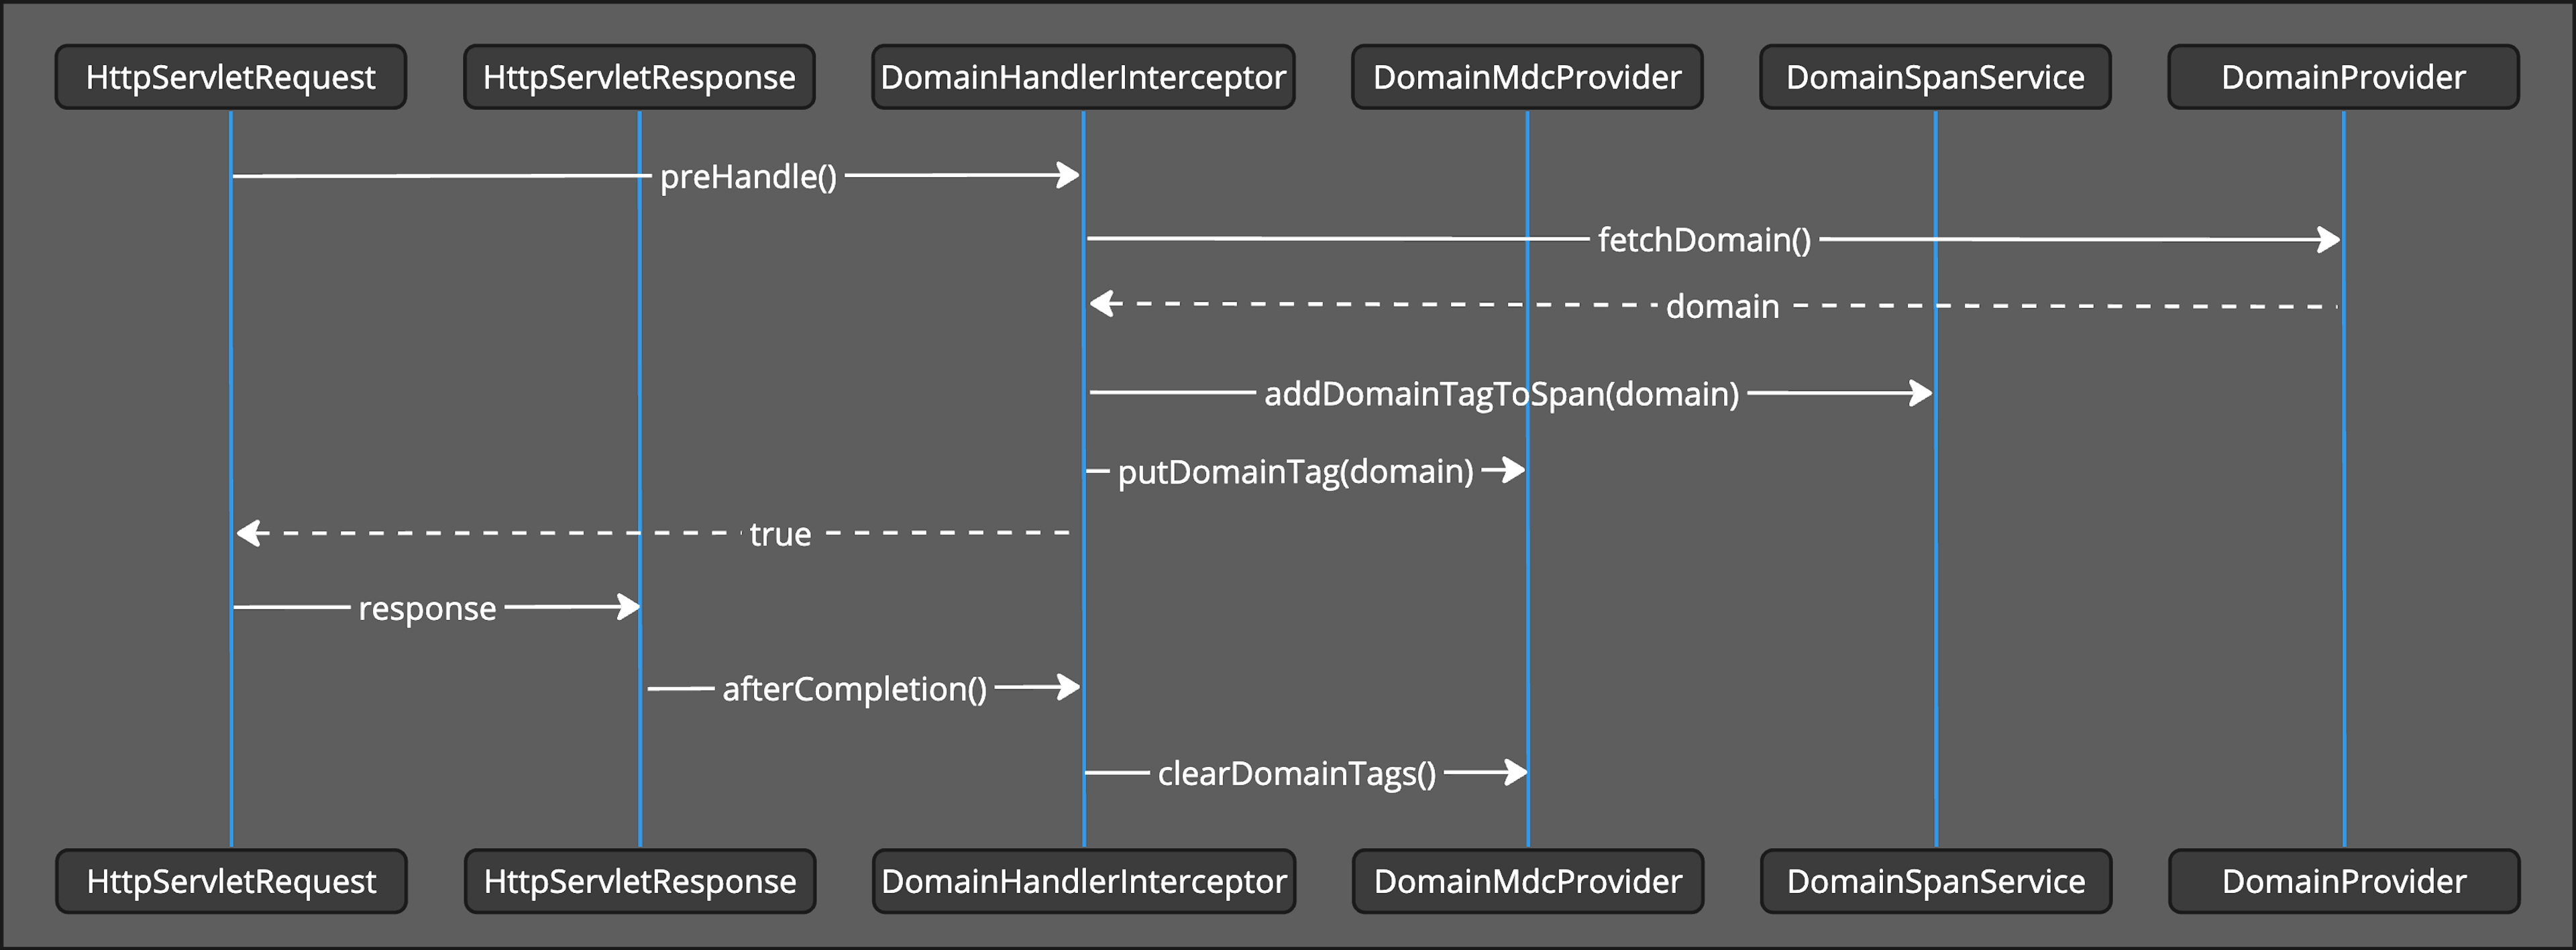 Diagram of Domain Annotations Processing for REST API requests